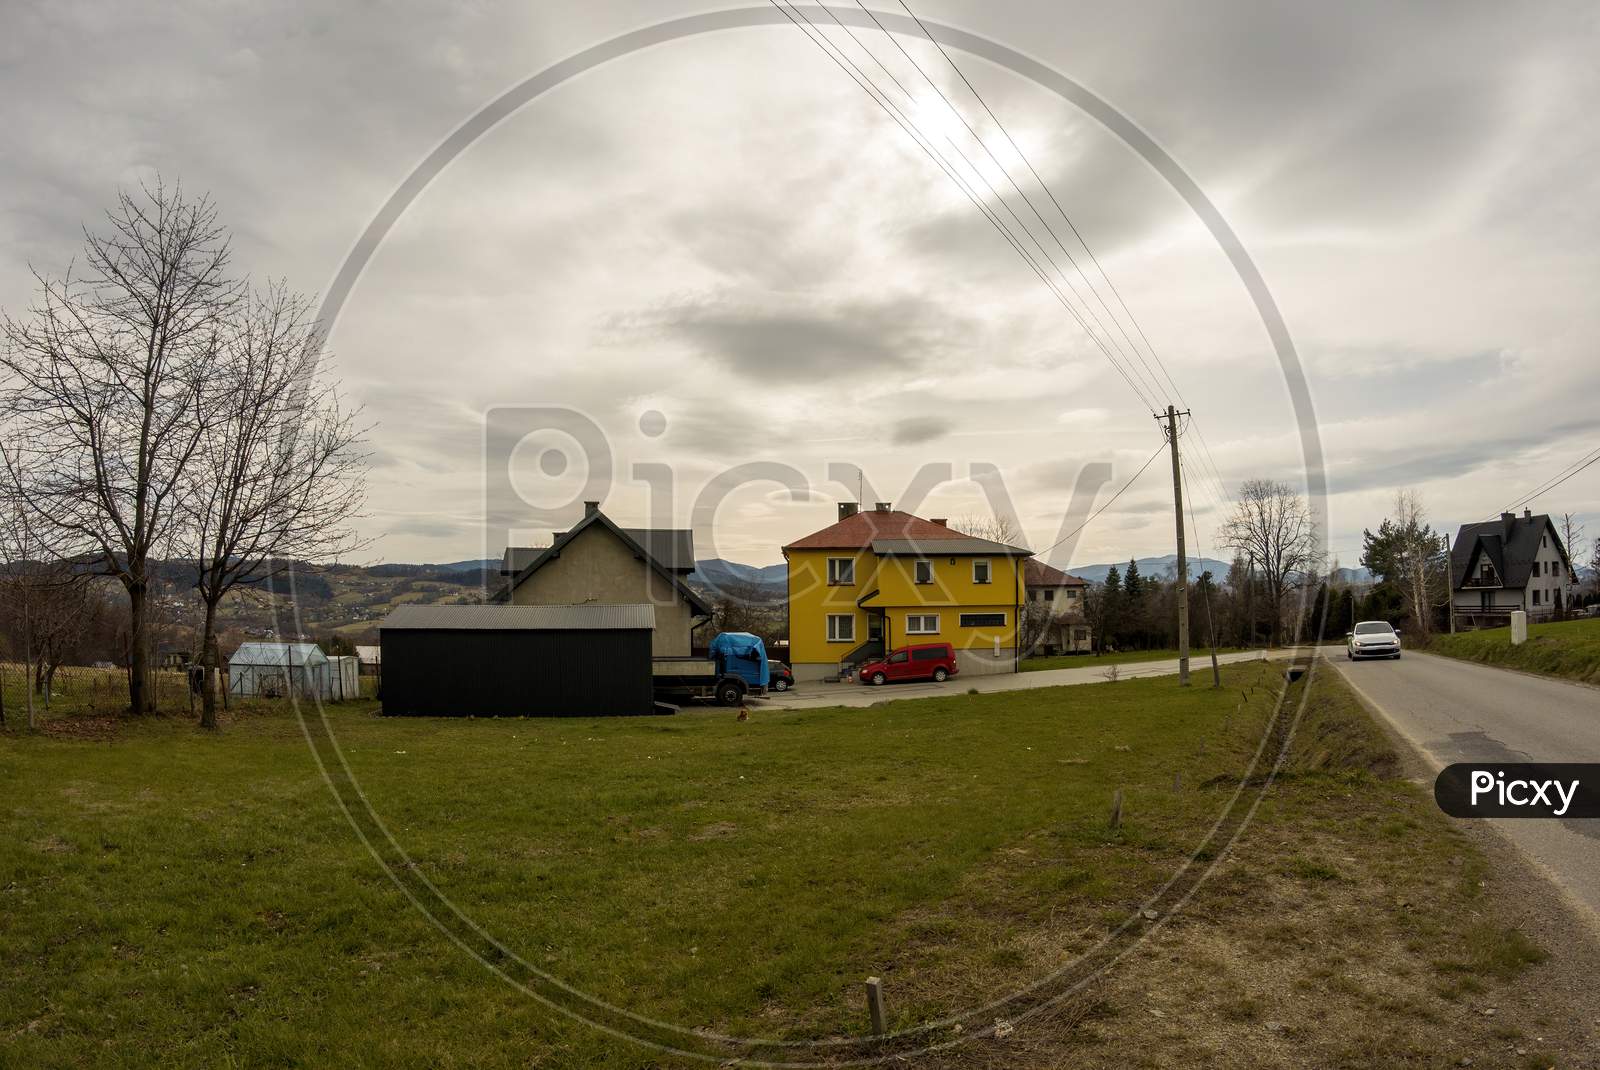 Limanowa, South Poland - April 01, 2021: View Of Houses Showing Country Life In Polish Village Located In Lysa Gora Beskid Wyspowy Polish Mountains